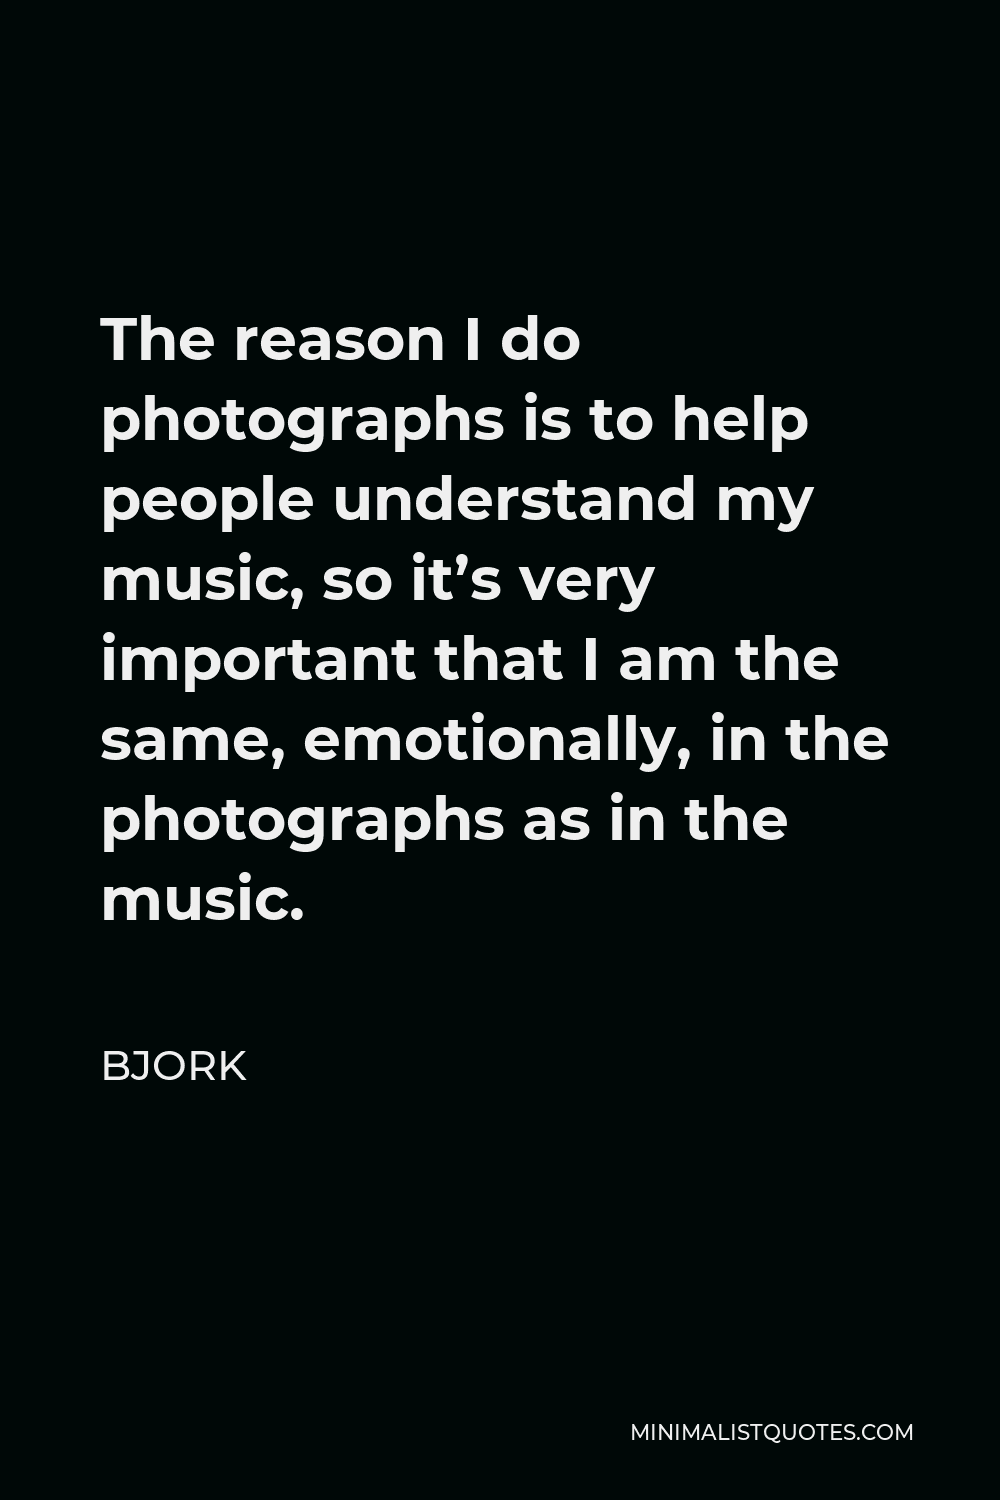 Bjork Quote - The reason I do photographs is to help people understand my music, so it’s very important that I am the same, emotionally, in the photographs as in the music.